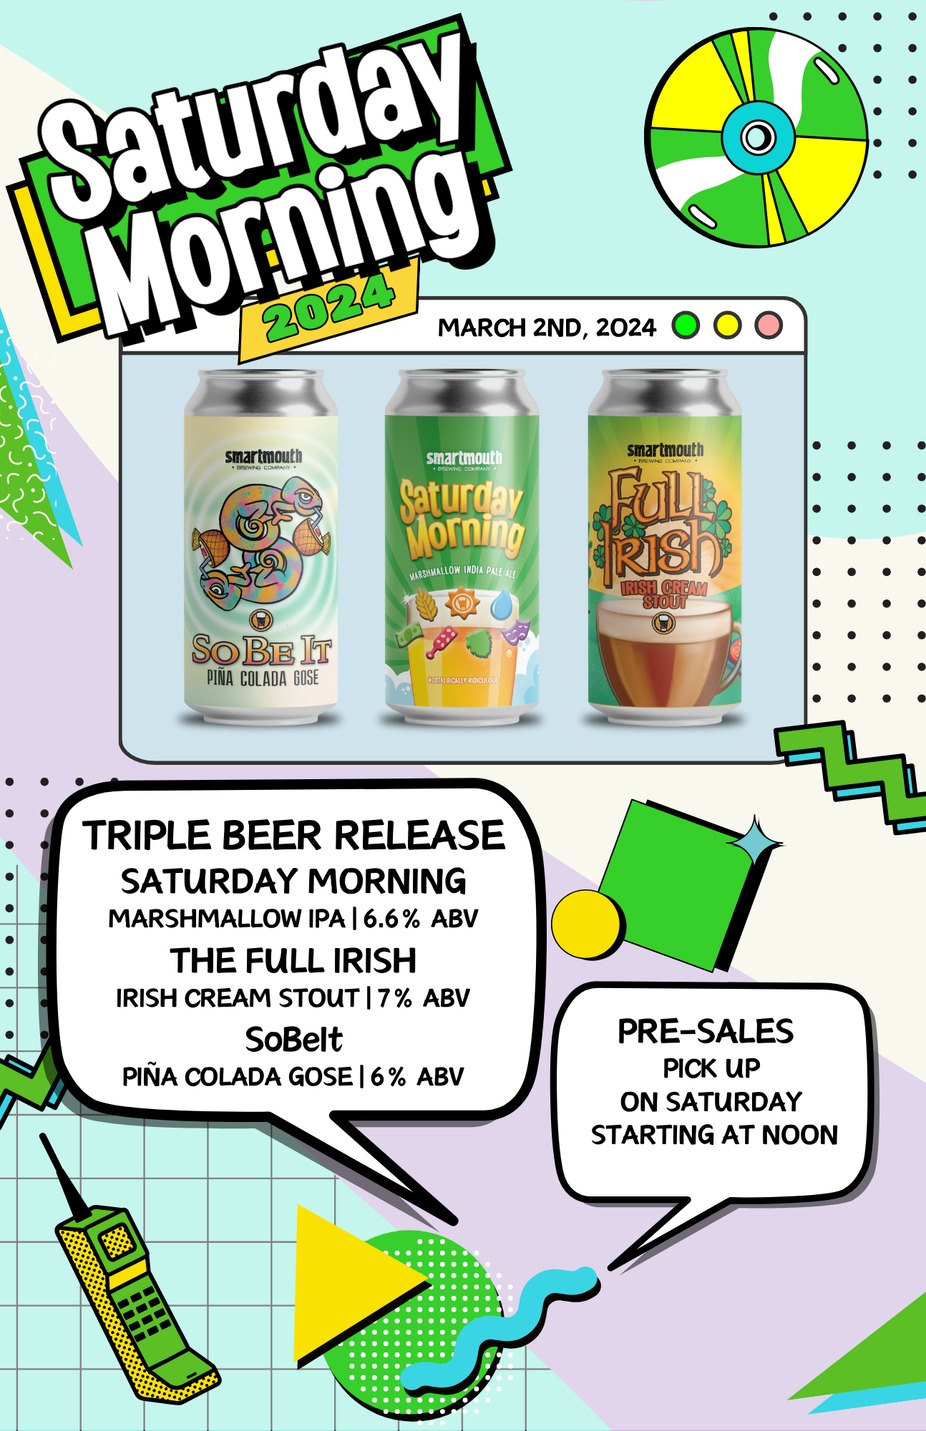 #NostalgicallyRidiculous Triple Beer Release event photo